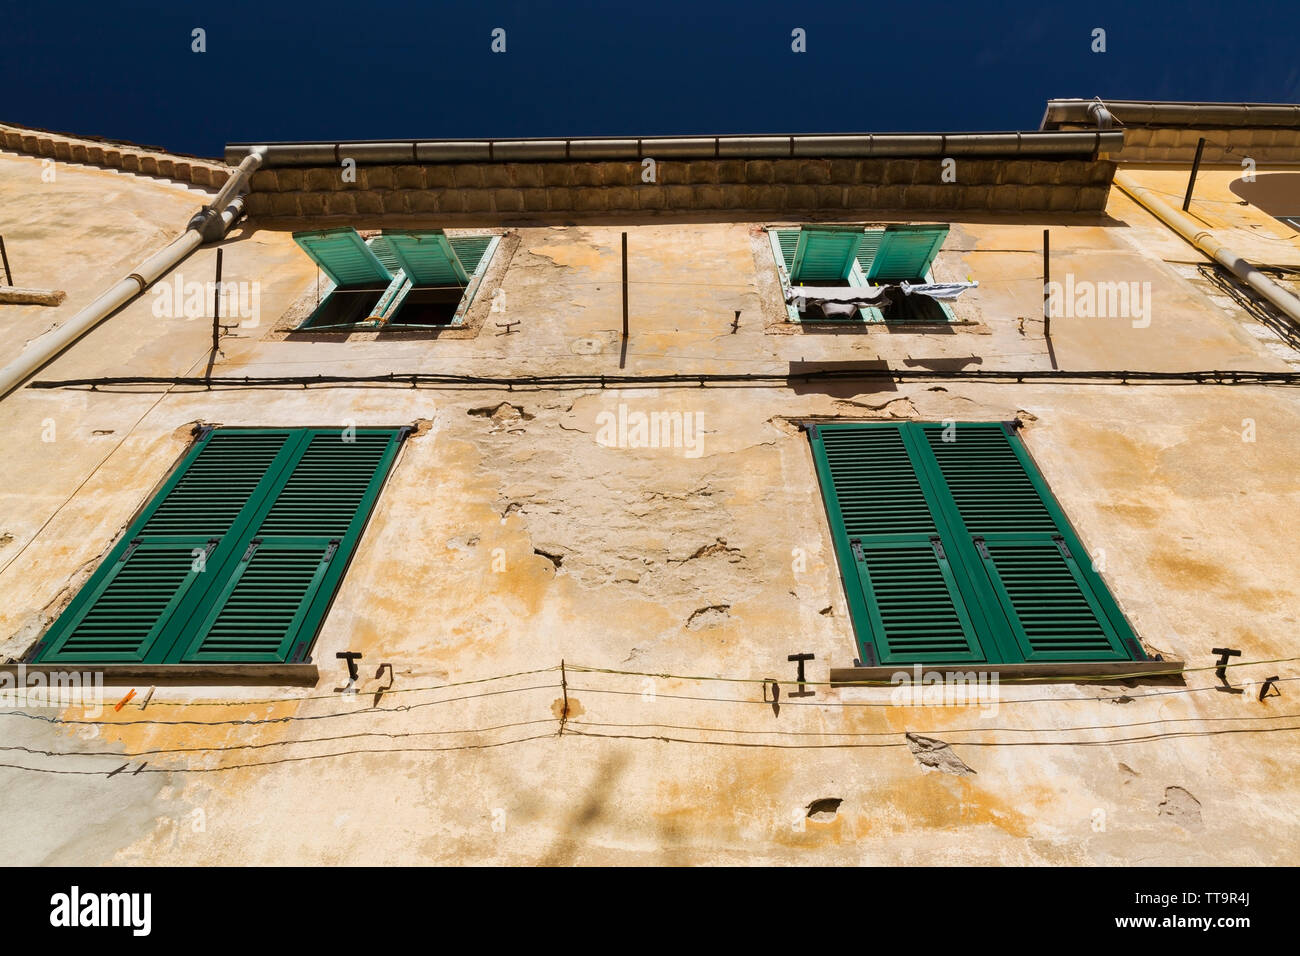 Old building facade with windows covered with green wooden louvered shutters, Villefranche-sur-Mer, Provence, France, Europe Stock Photo